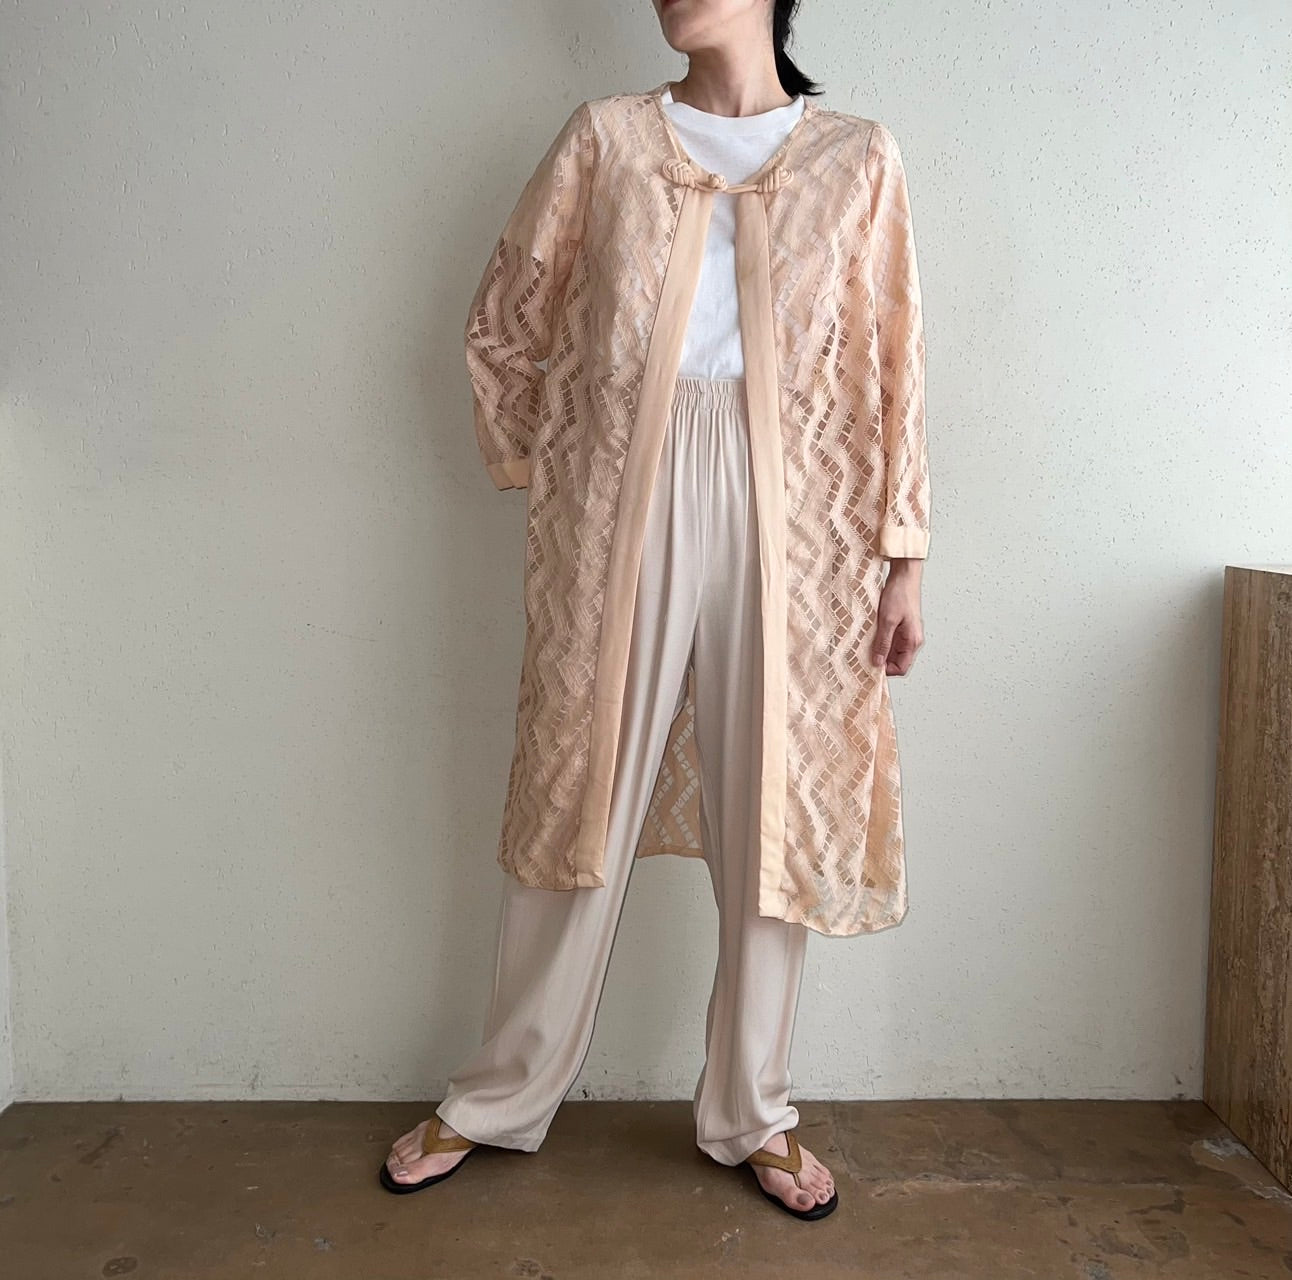 60s Lace Robe